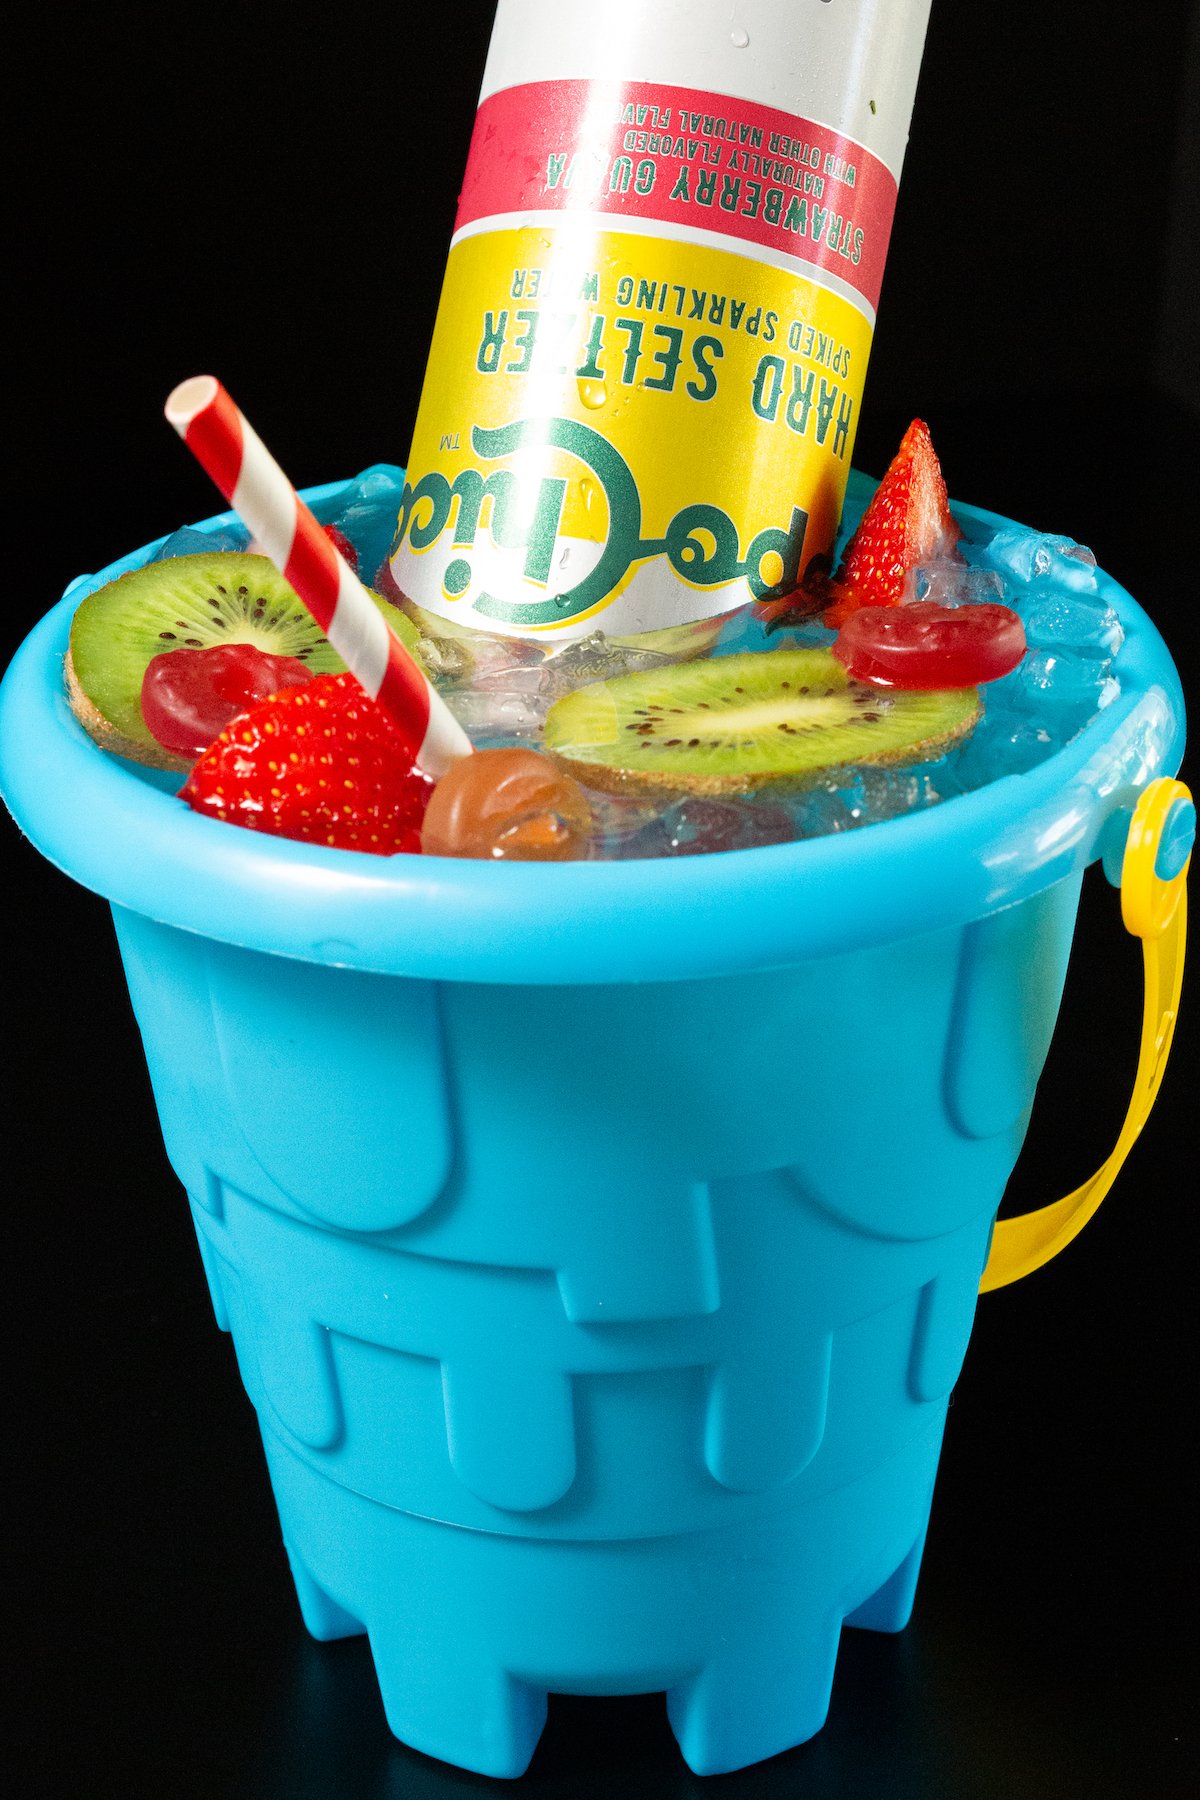 A sand bucket is filled with a cocktail that's topped with sliced kiwis, strawberries, lifesavers, and a hard seltzer.